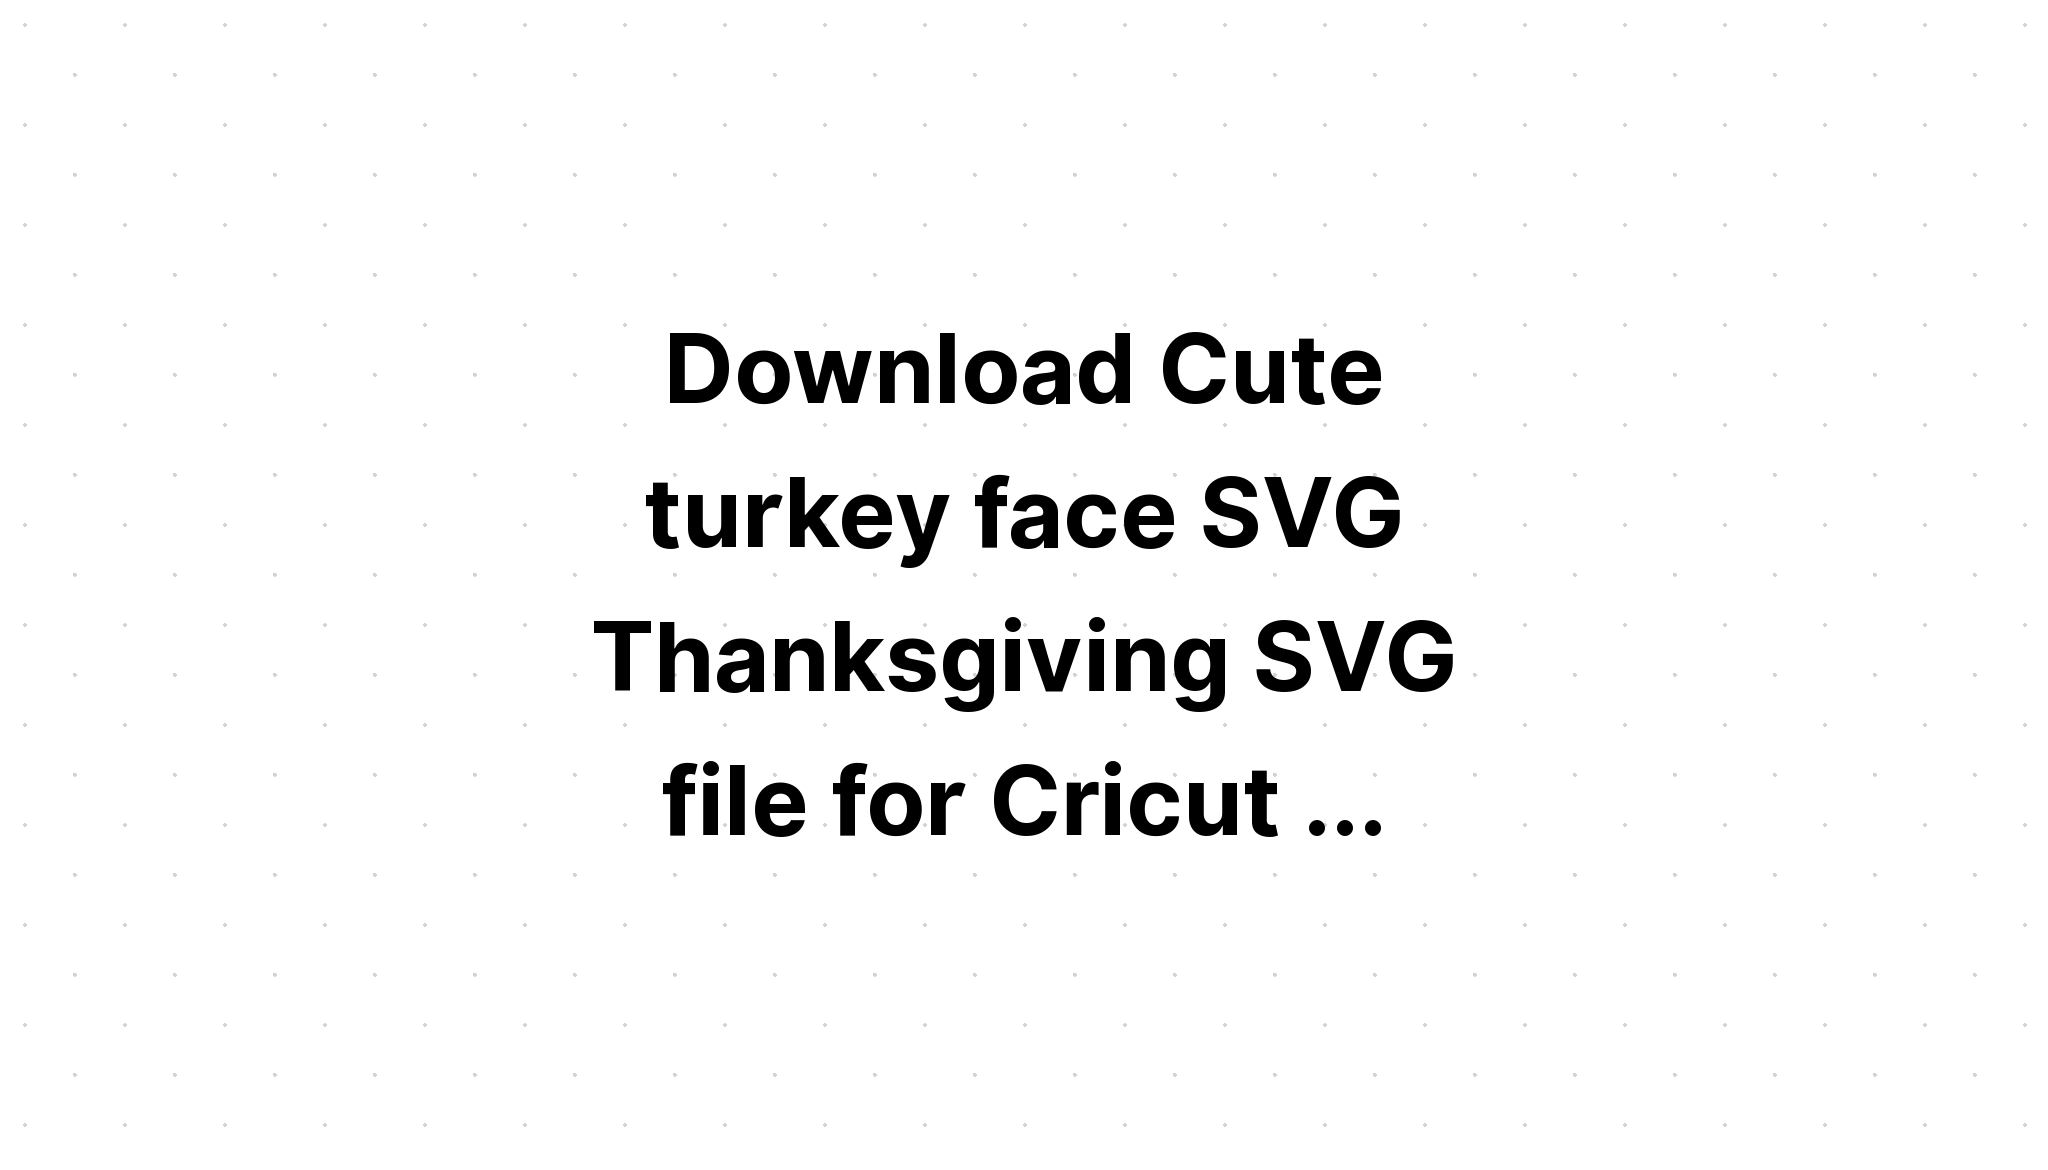 Download Cute Free Thanksgiving Svg - Layered SVG Cut File